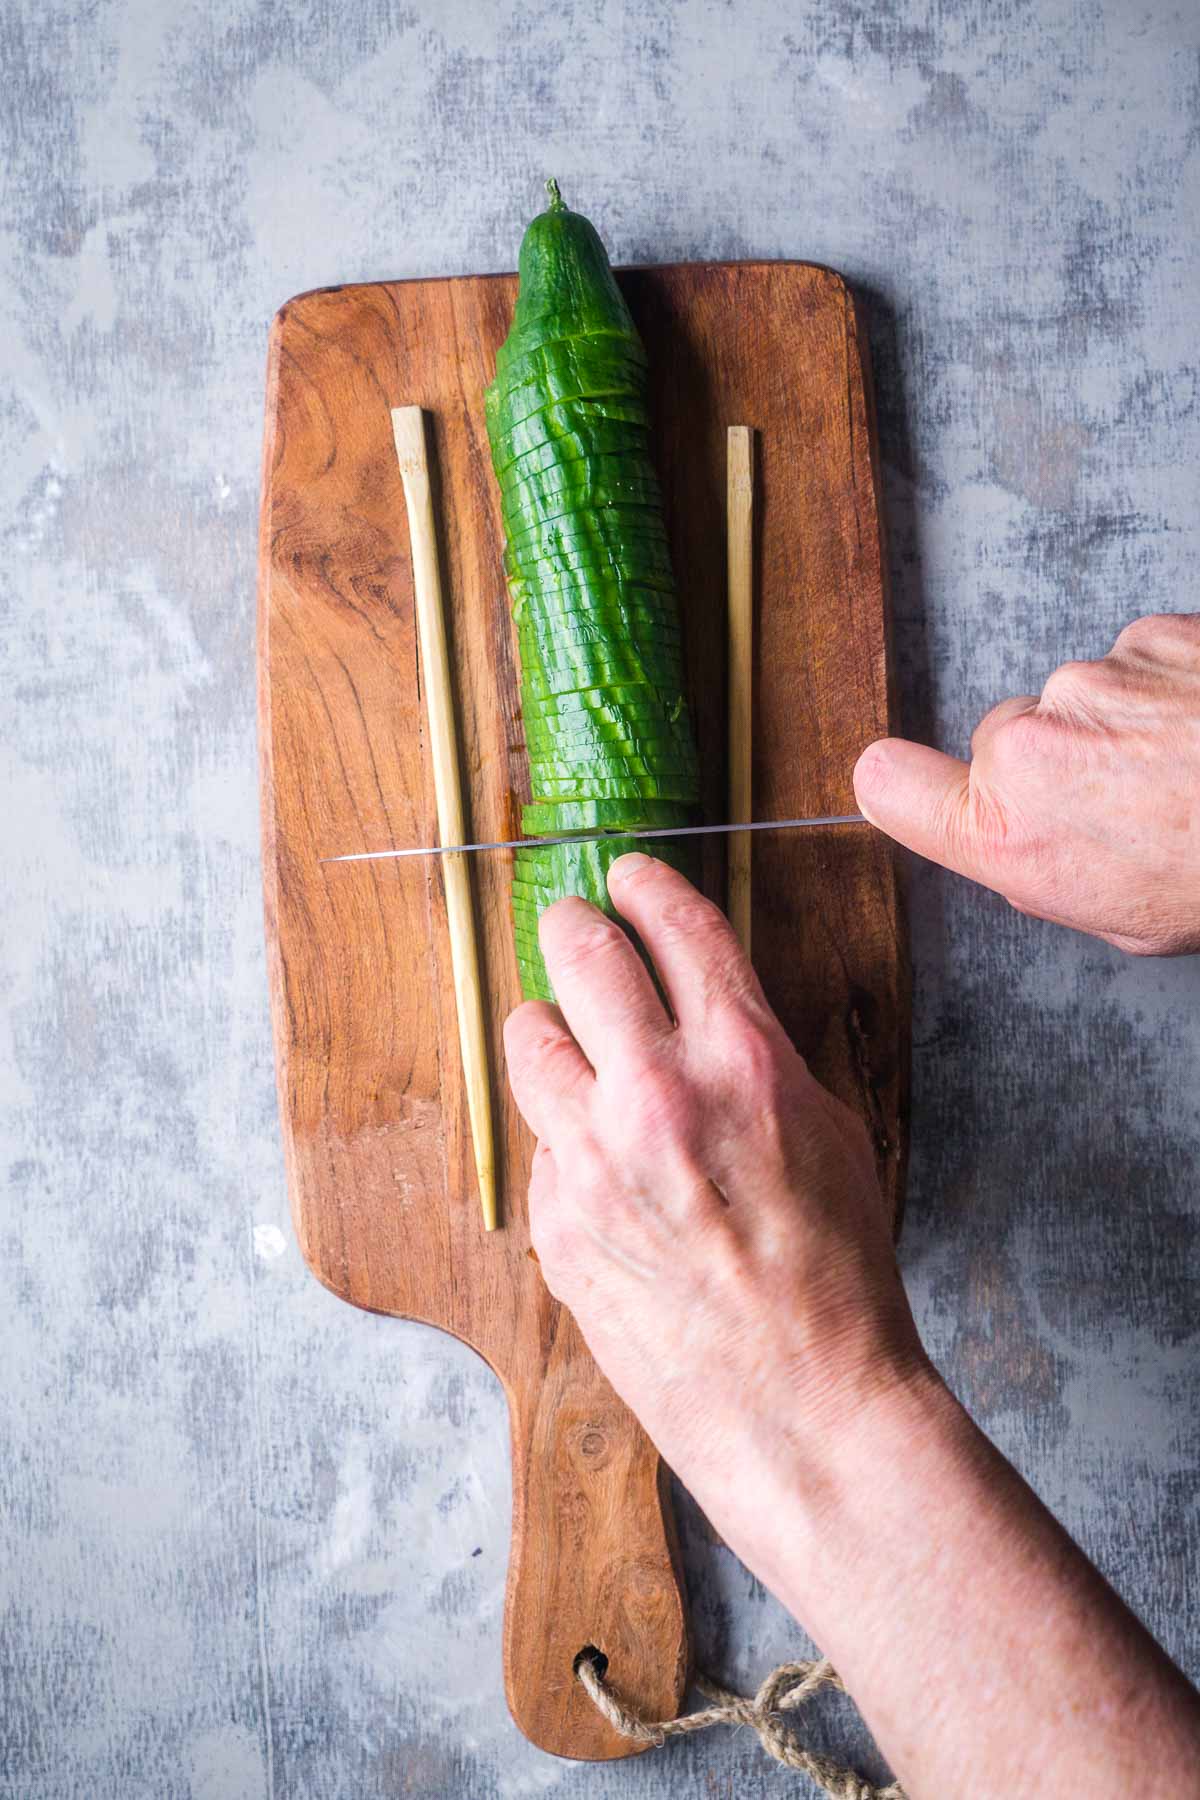 cucumber between two wooden chopsticks on cutting board is being sliced by knife in a person's hands